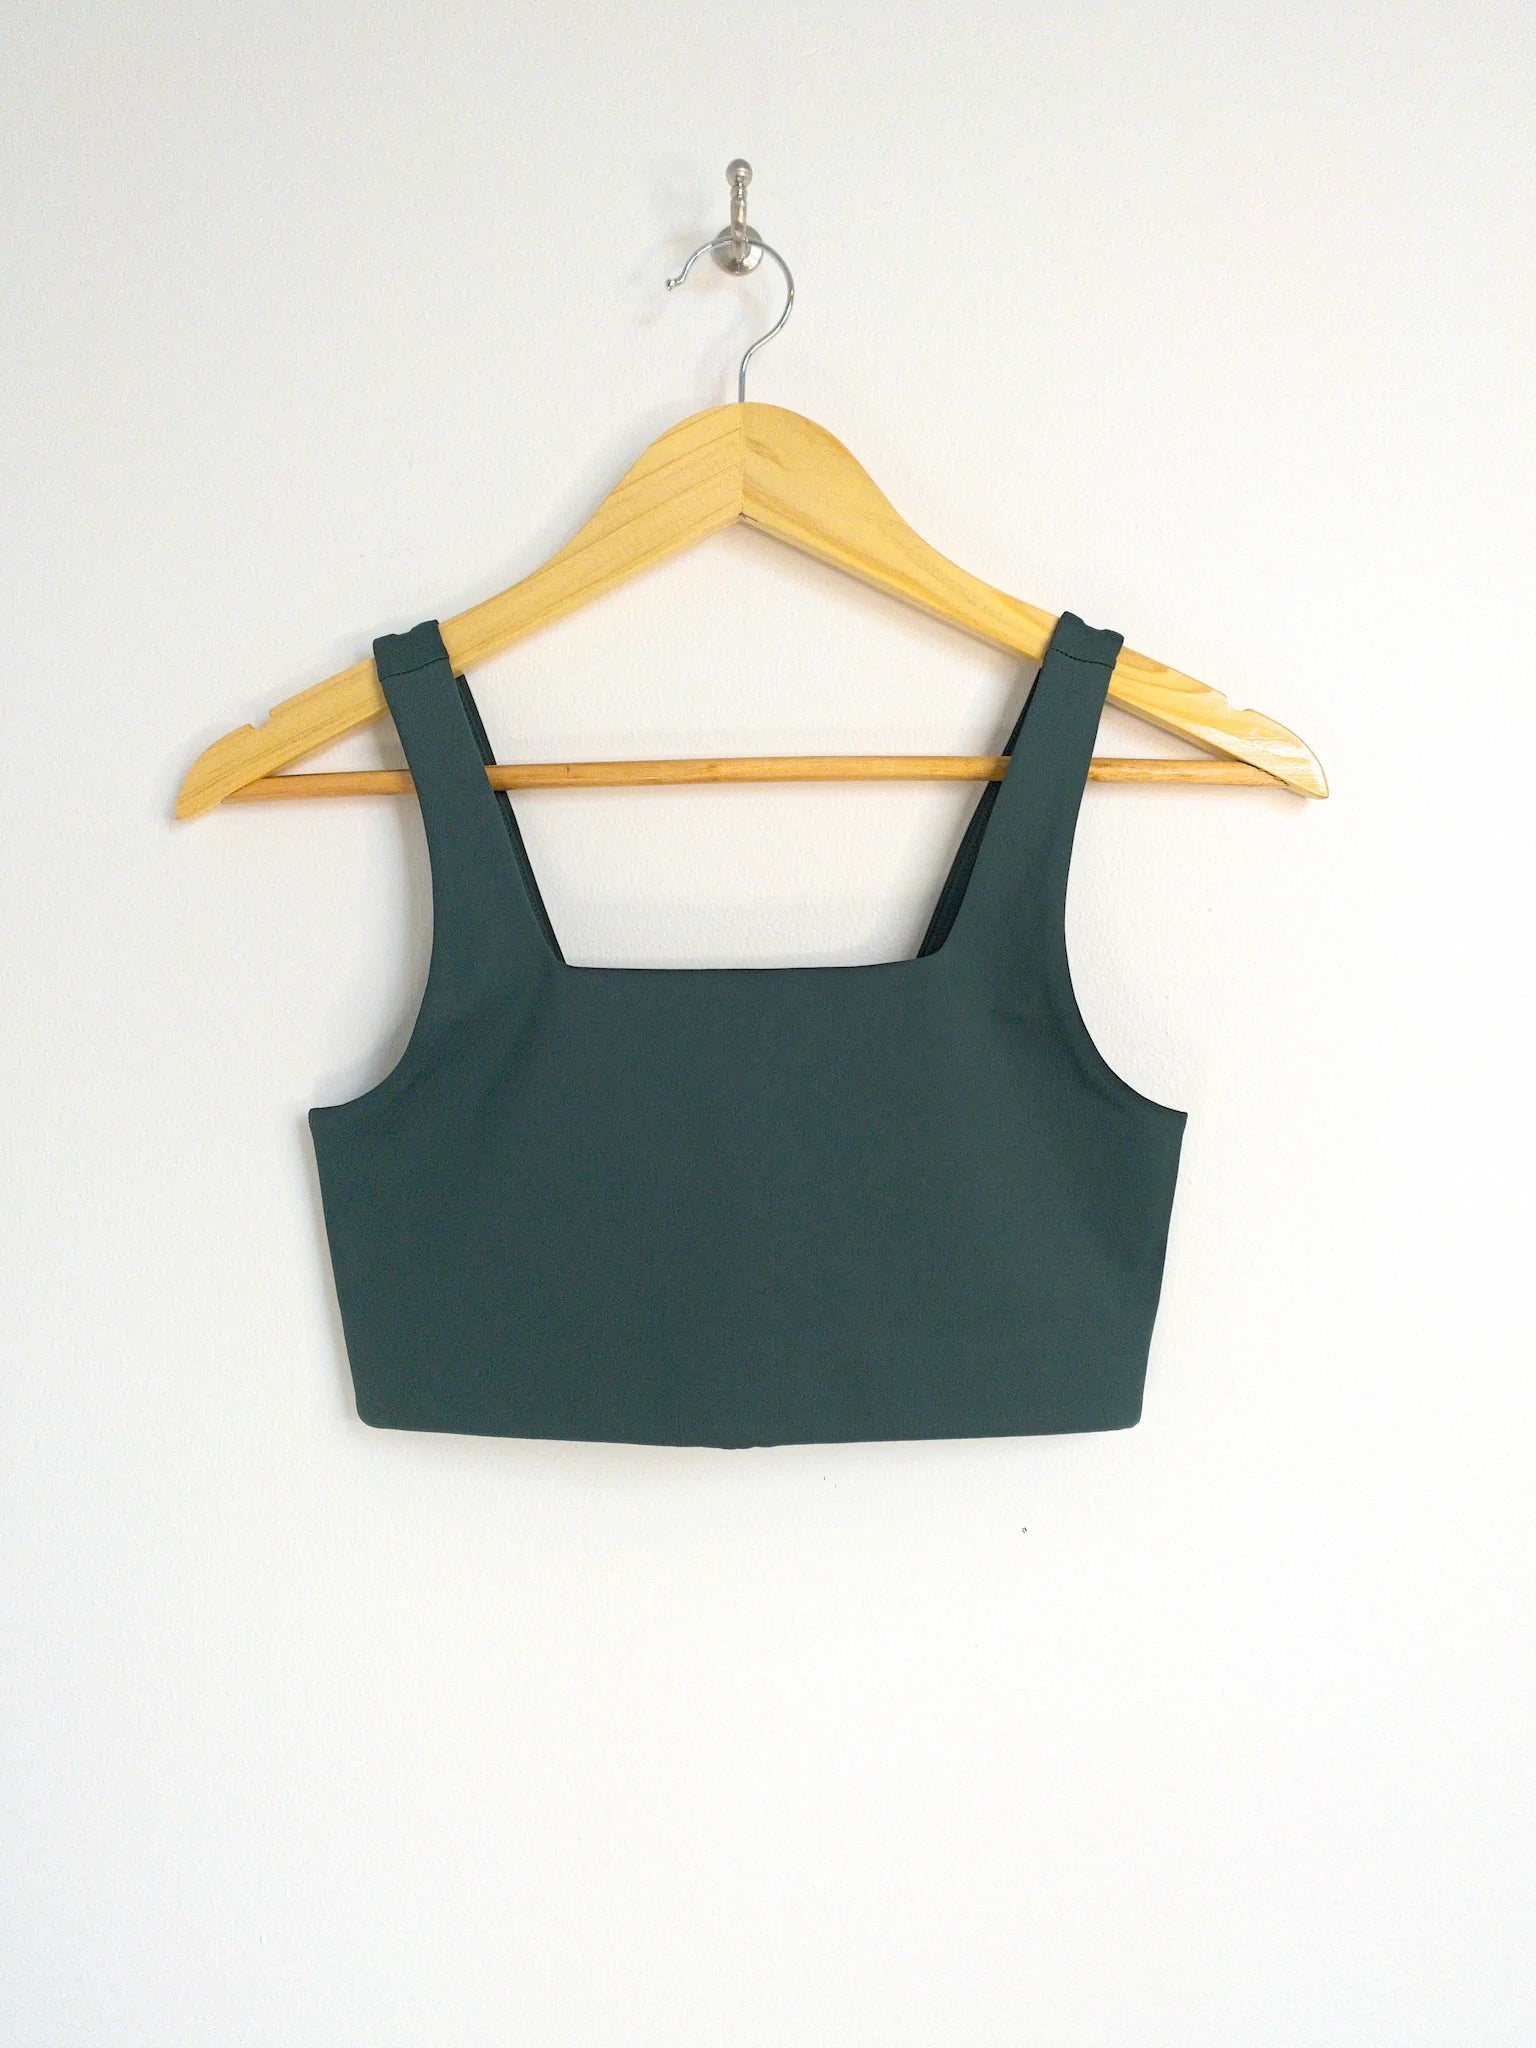 Girlfriend Collective Tommy Bra in Moss